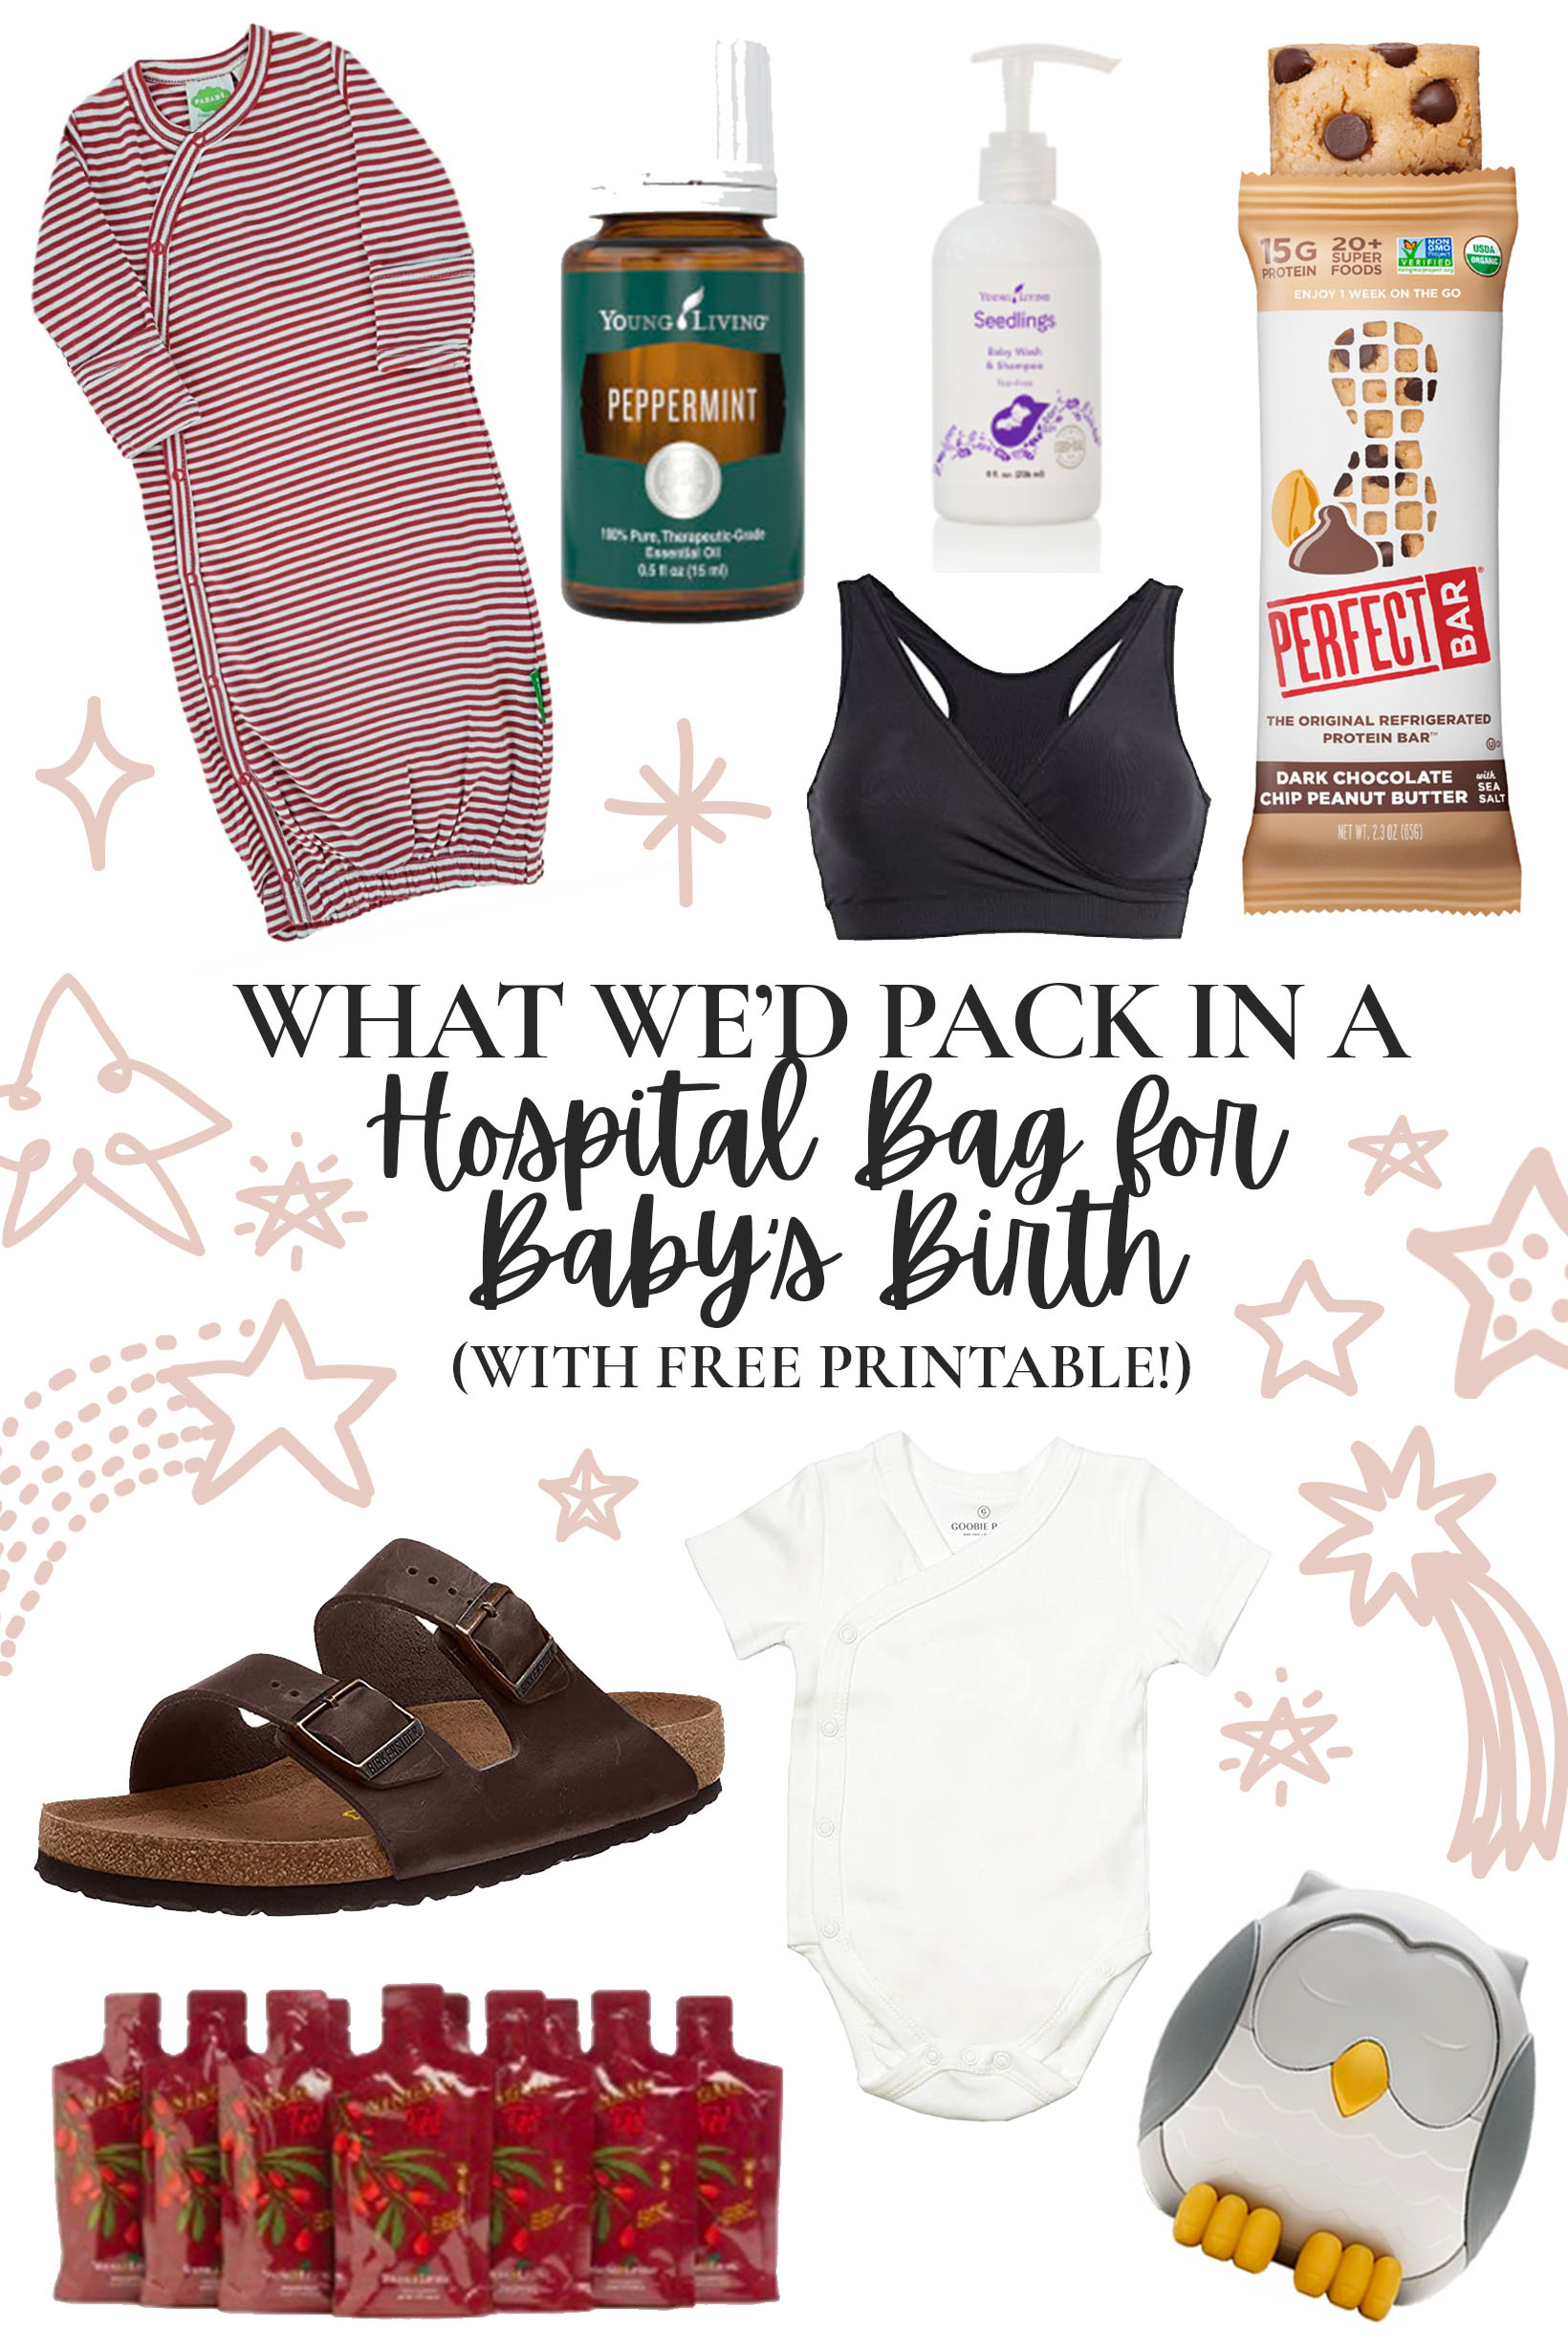 What to pack in a hospital bag